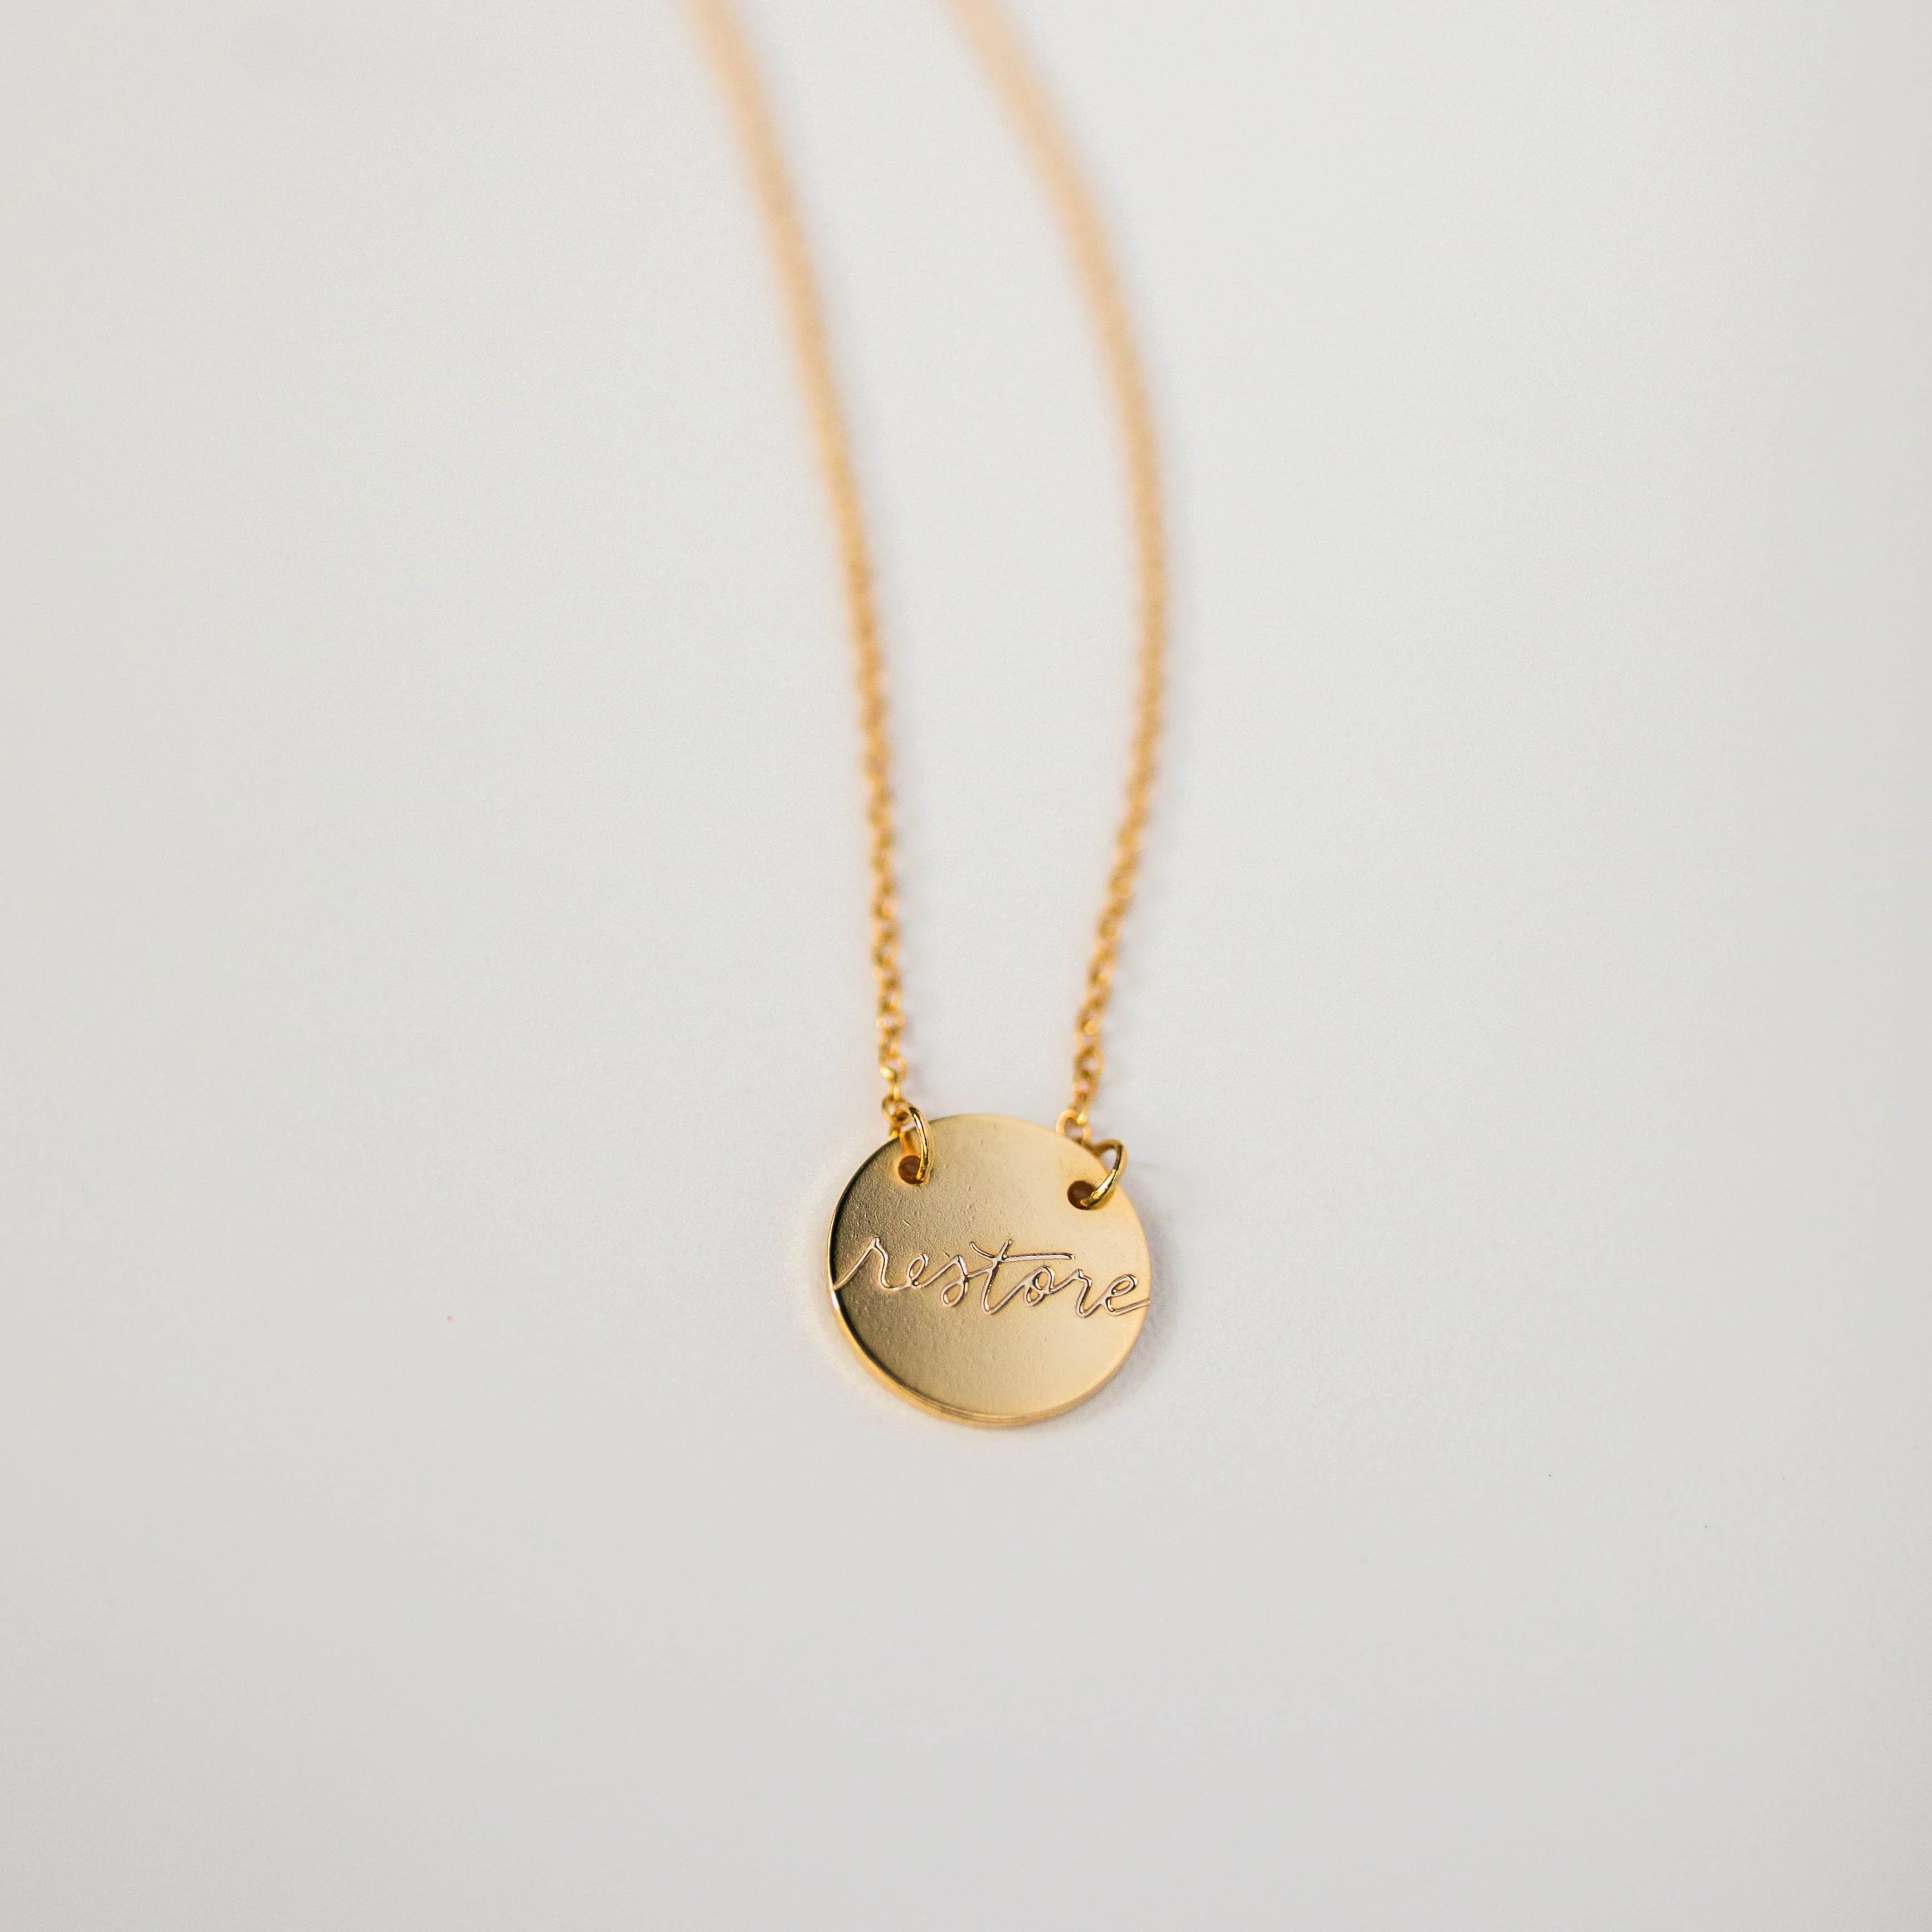 Restore Necklace | The Daily Grace Co.